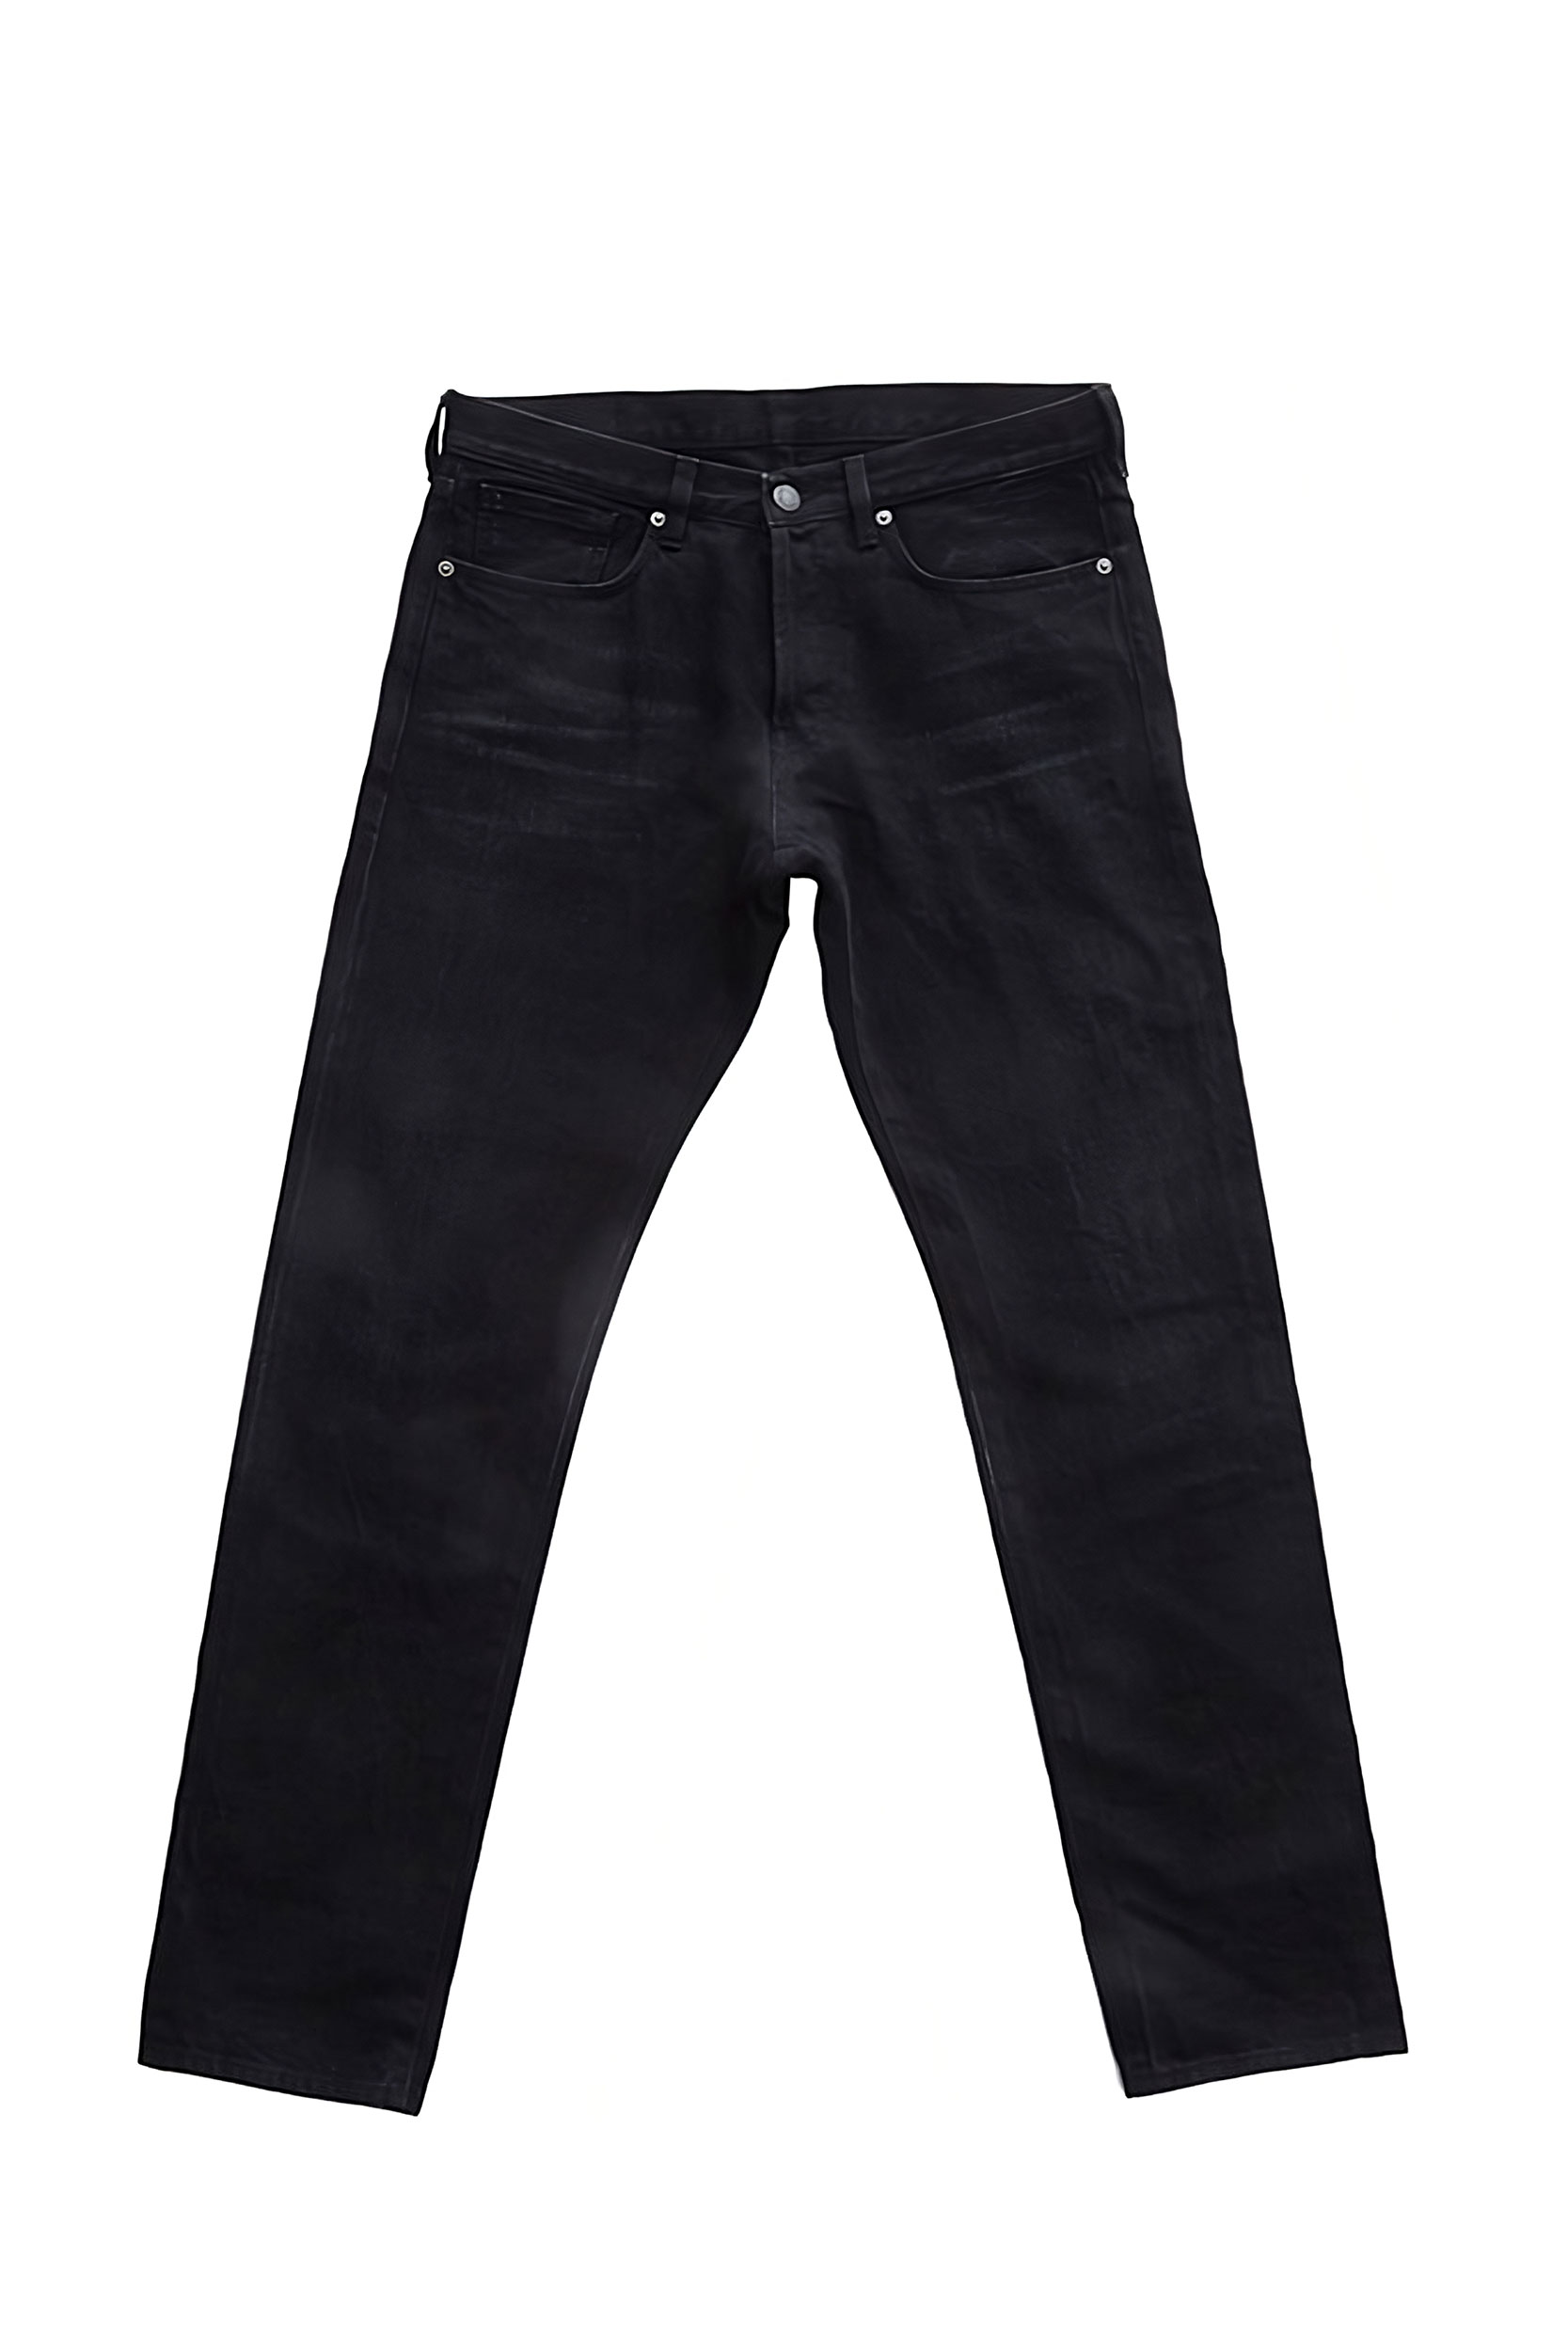 RUNDHOLZ, Comfortable Black Denim Trousers in a Washed Out Look | NOBANANAS